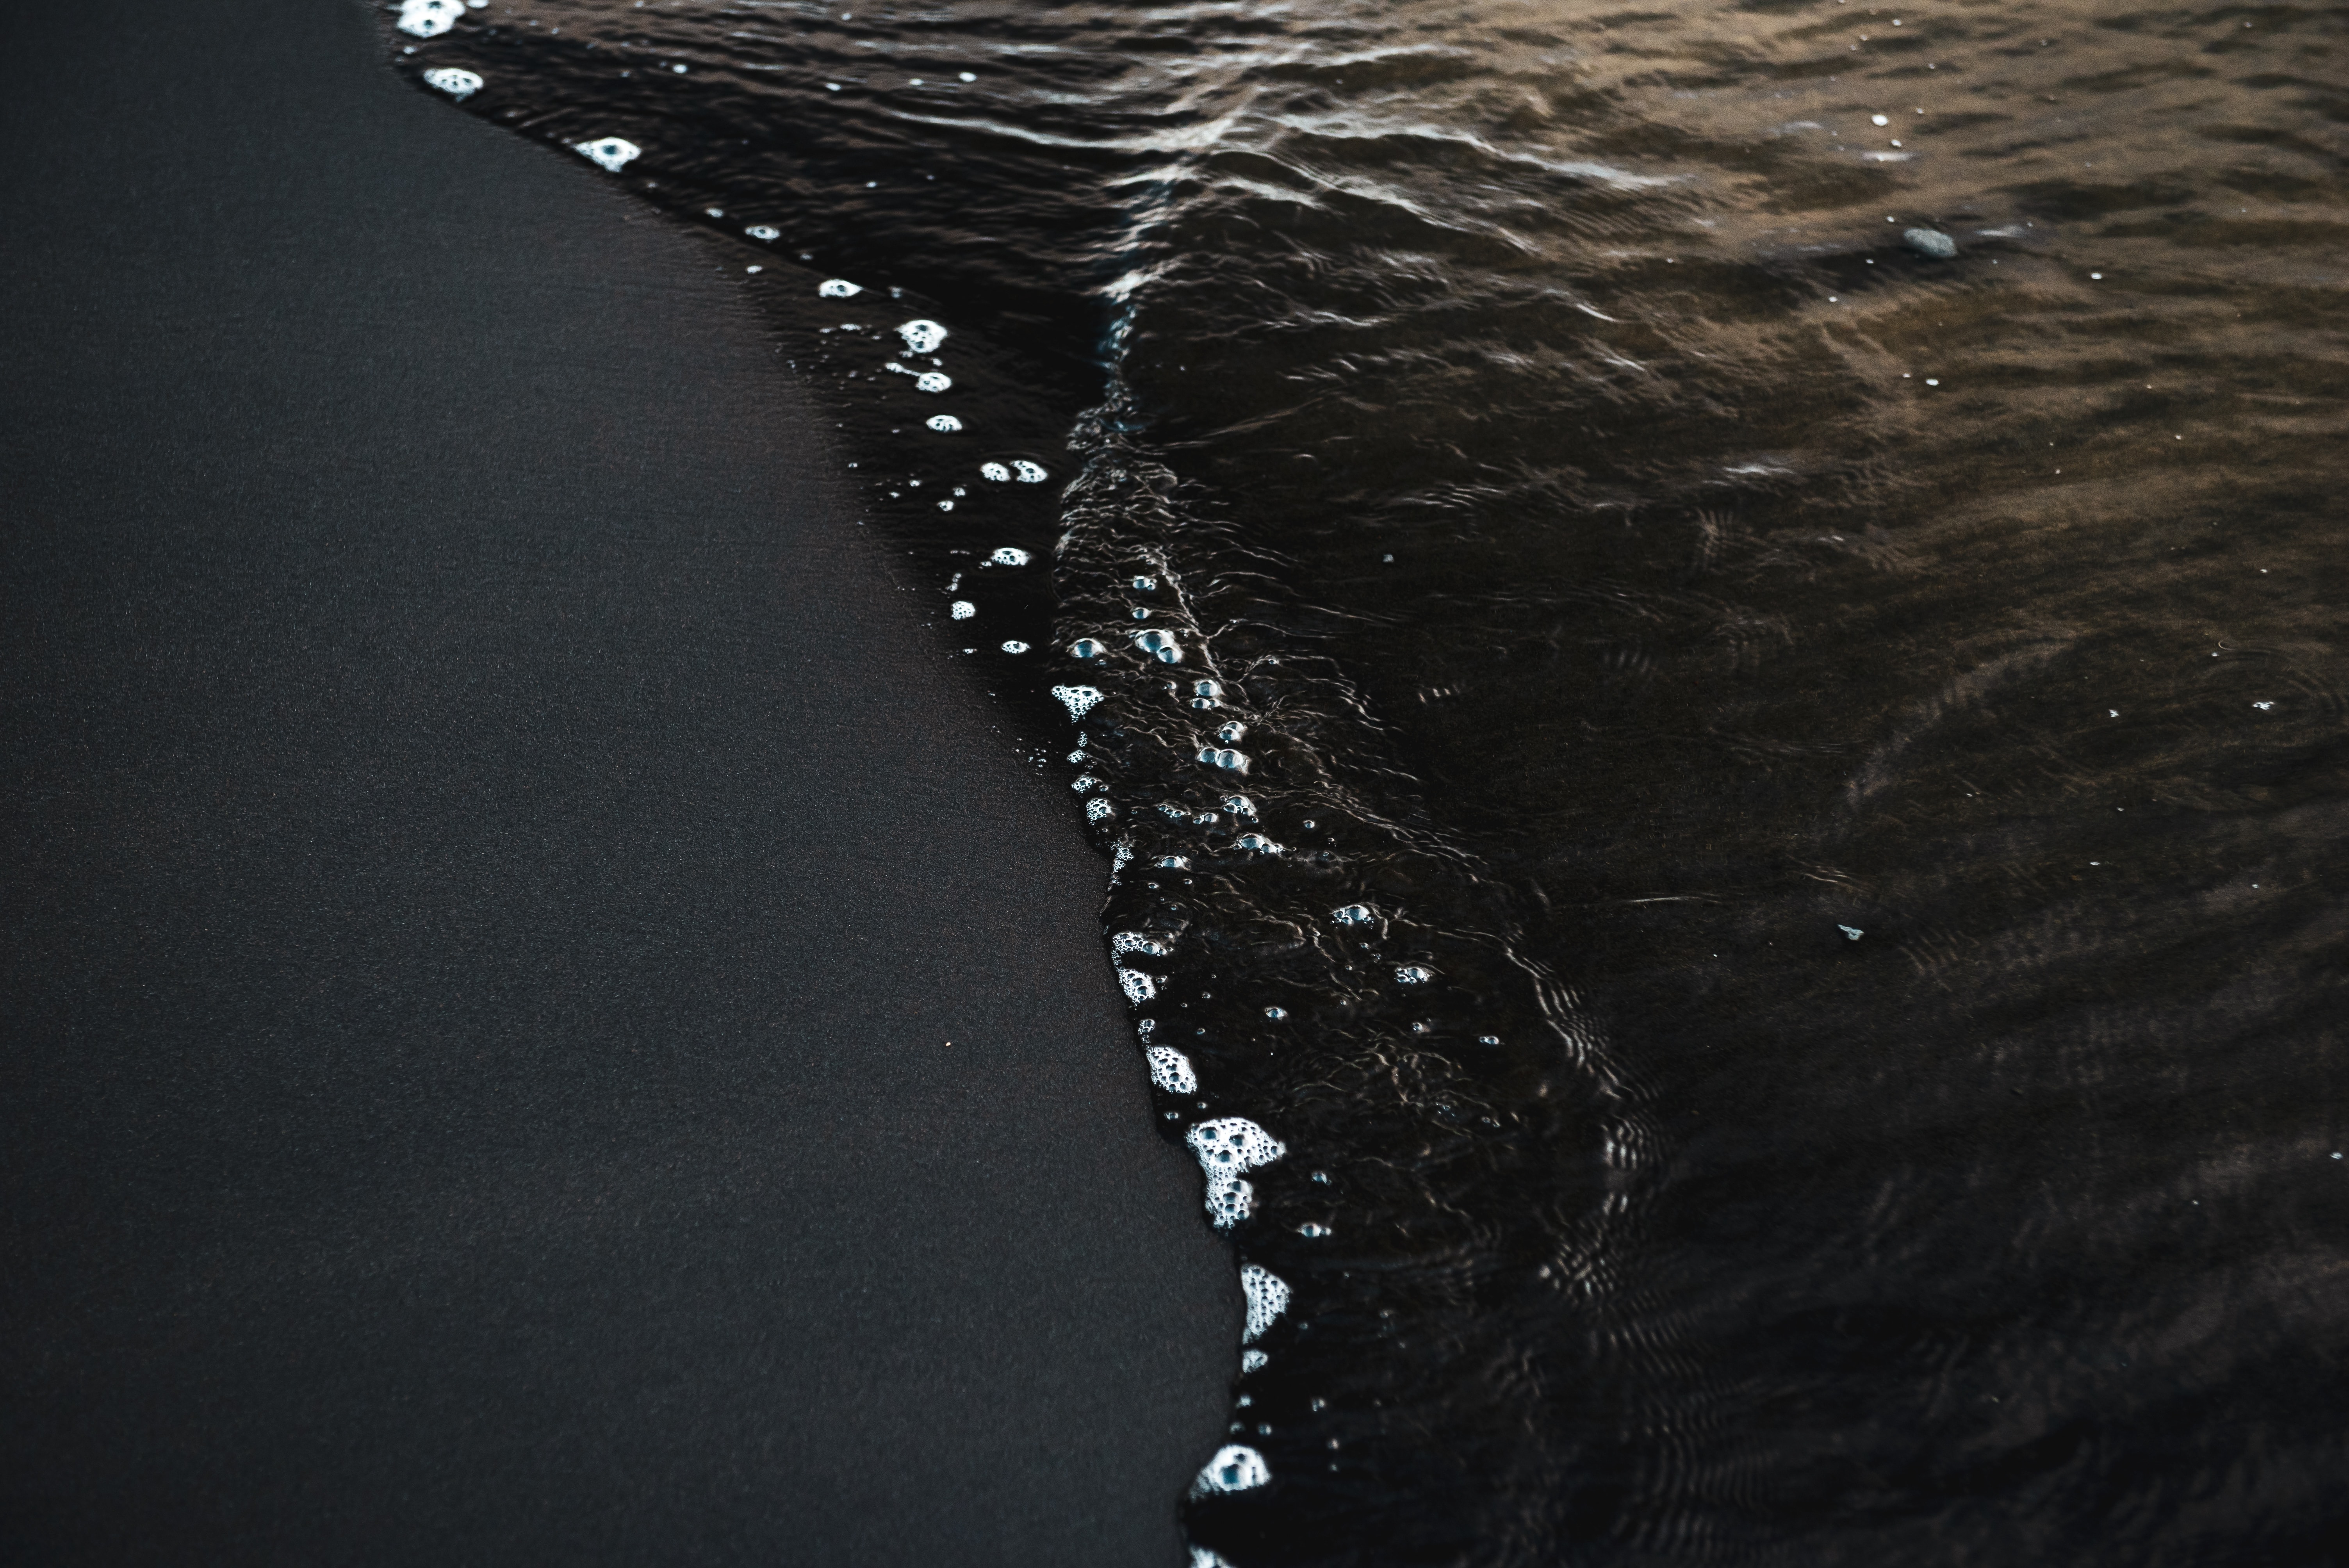 And by black sands, we mean exotic, pristine, and inviting black sands.